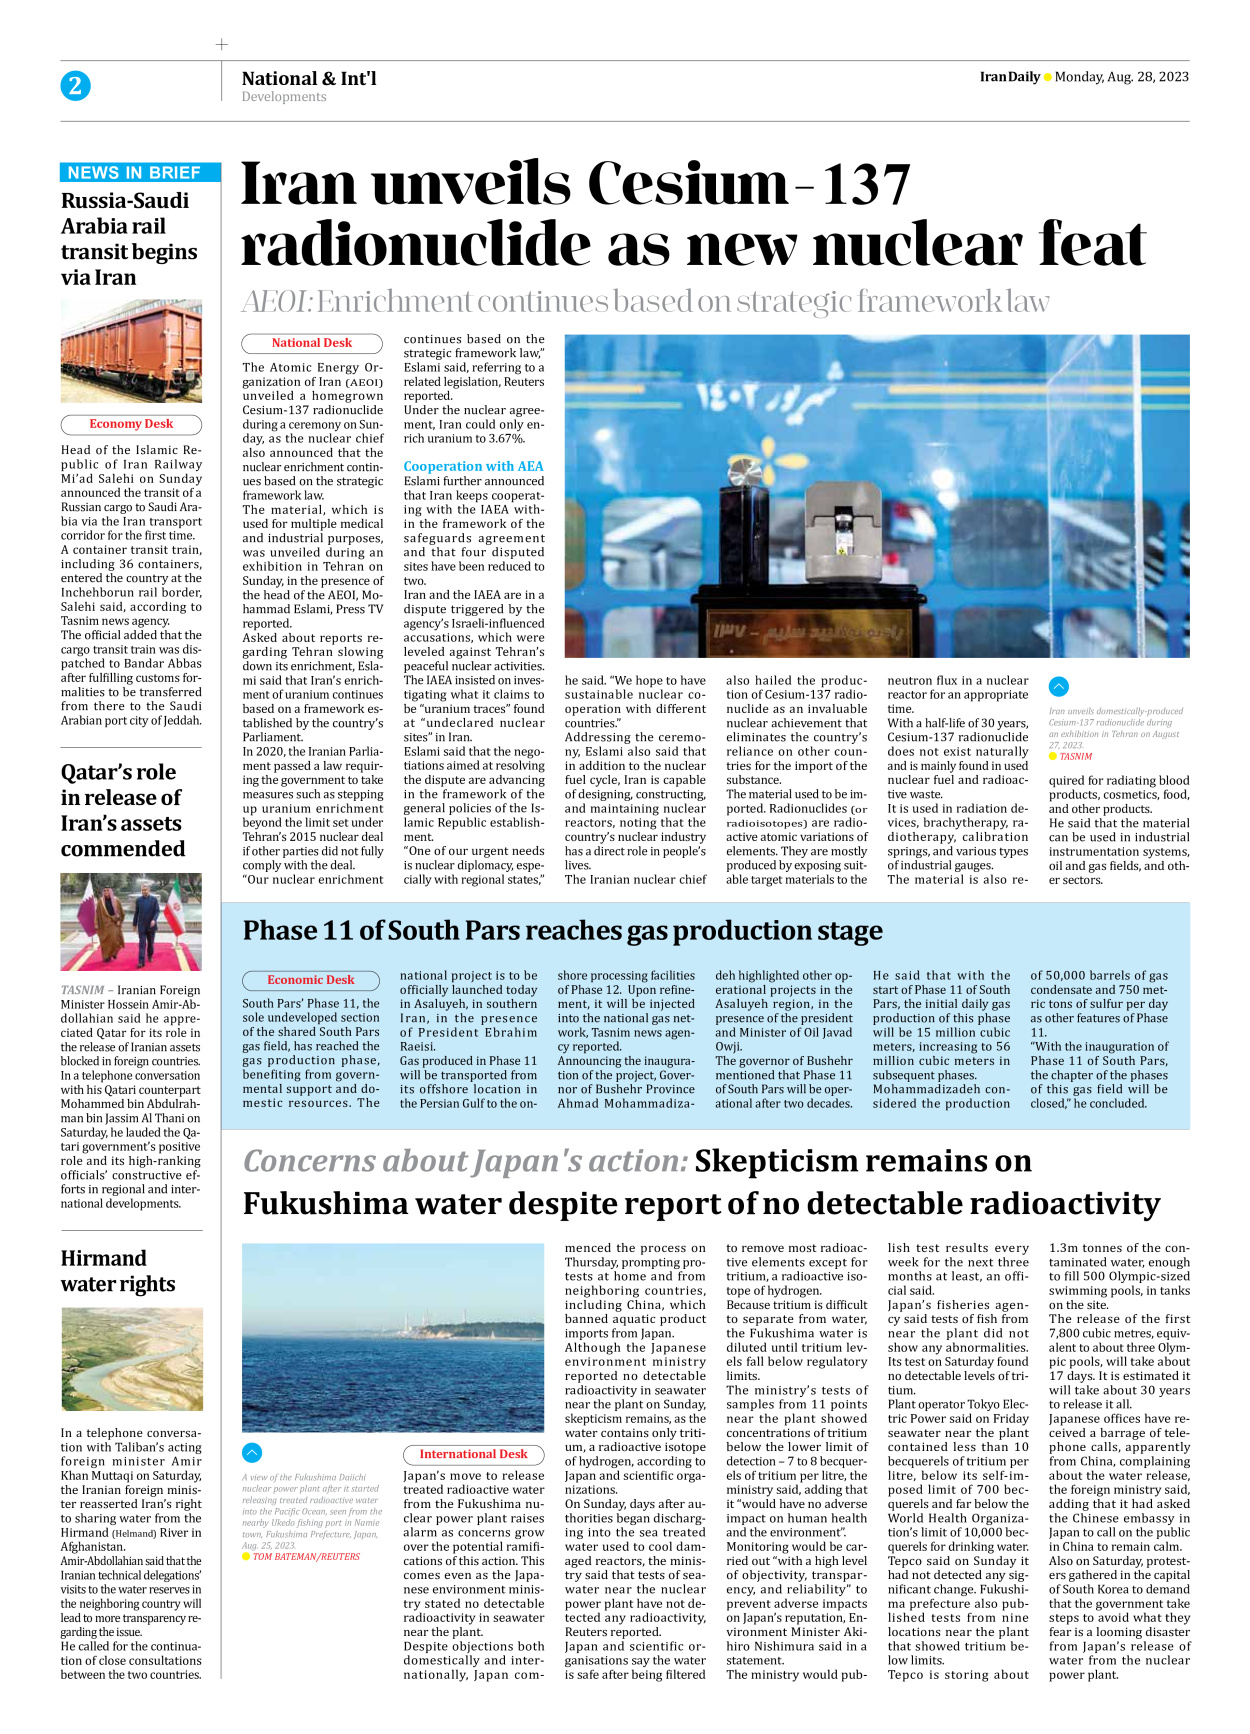 Iran Daily - Number Seven Thousand Three Hundred and Seventy Four - 28 August 2023 - Page 2